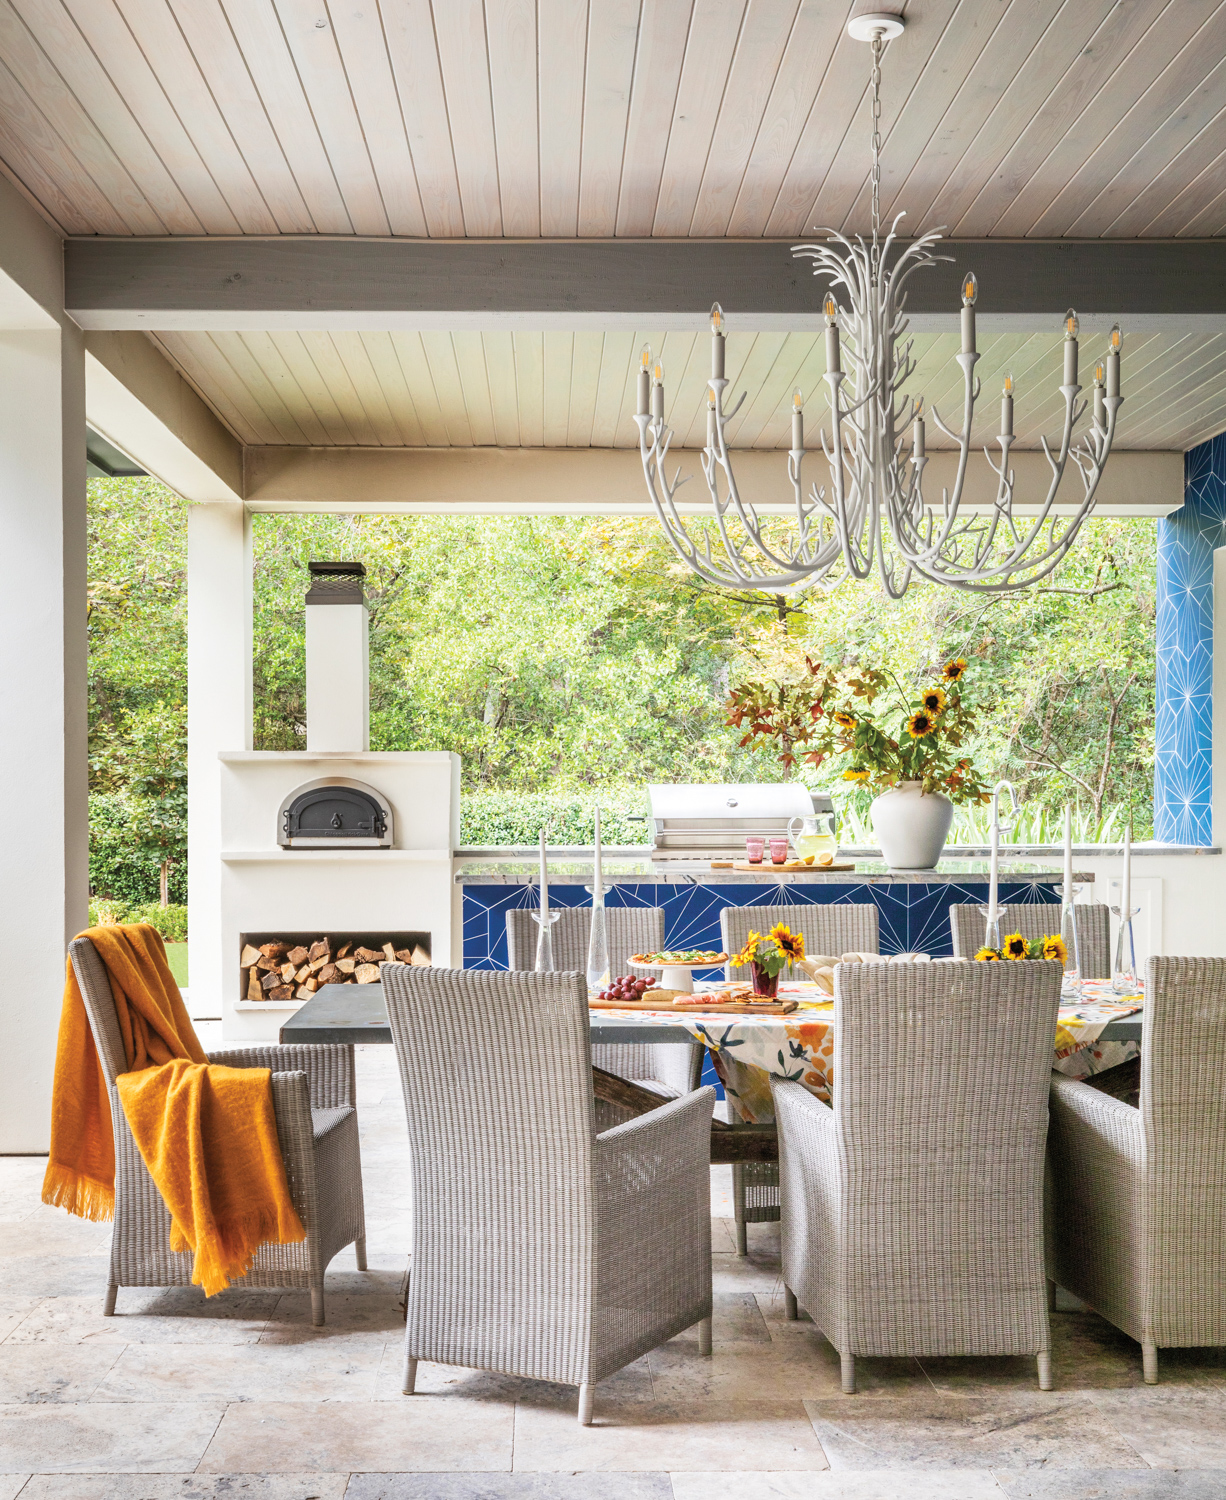 outdoor dining area with statement lighting, graphic blue tile and a pizza oven